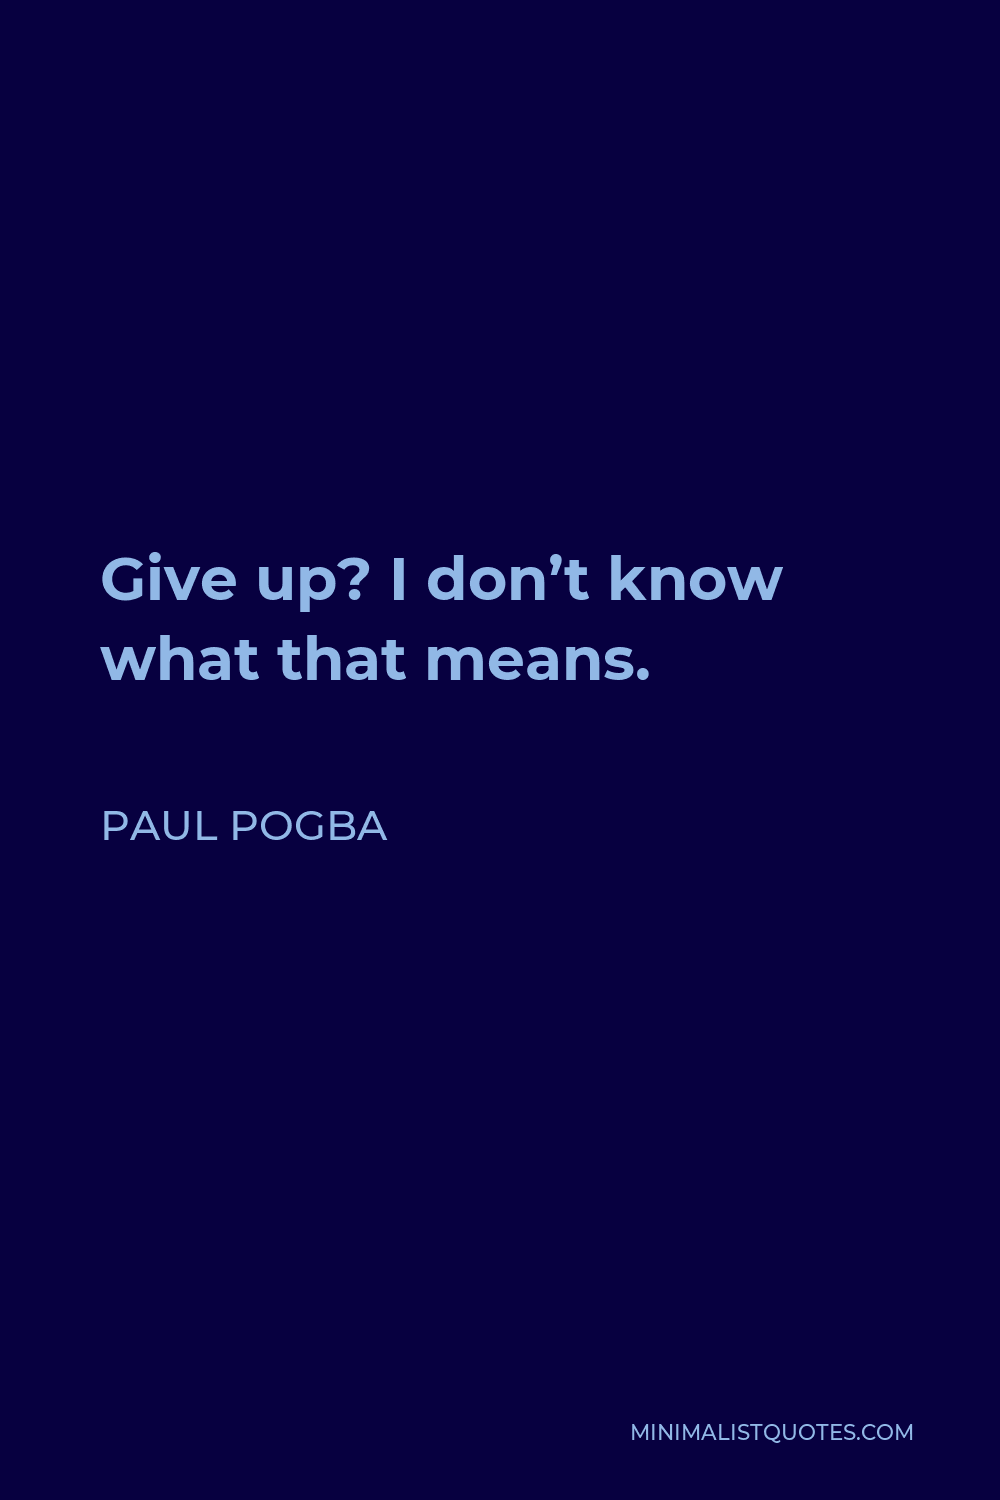 Paul Pogba Quote - Give up? I don’t know what that means.